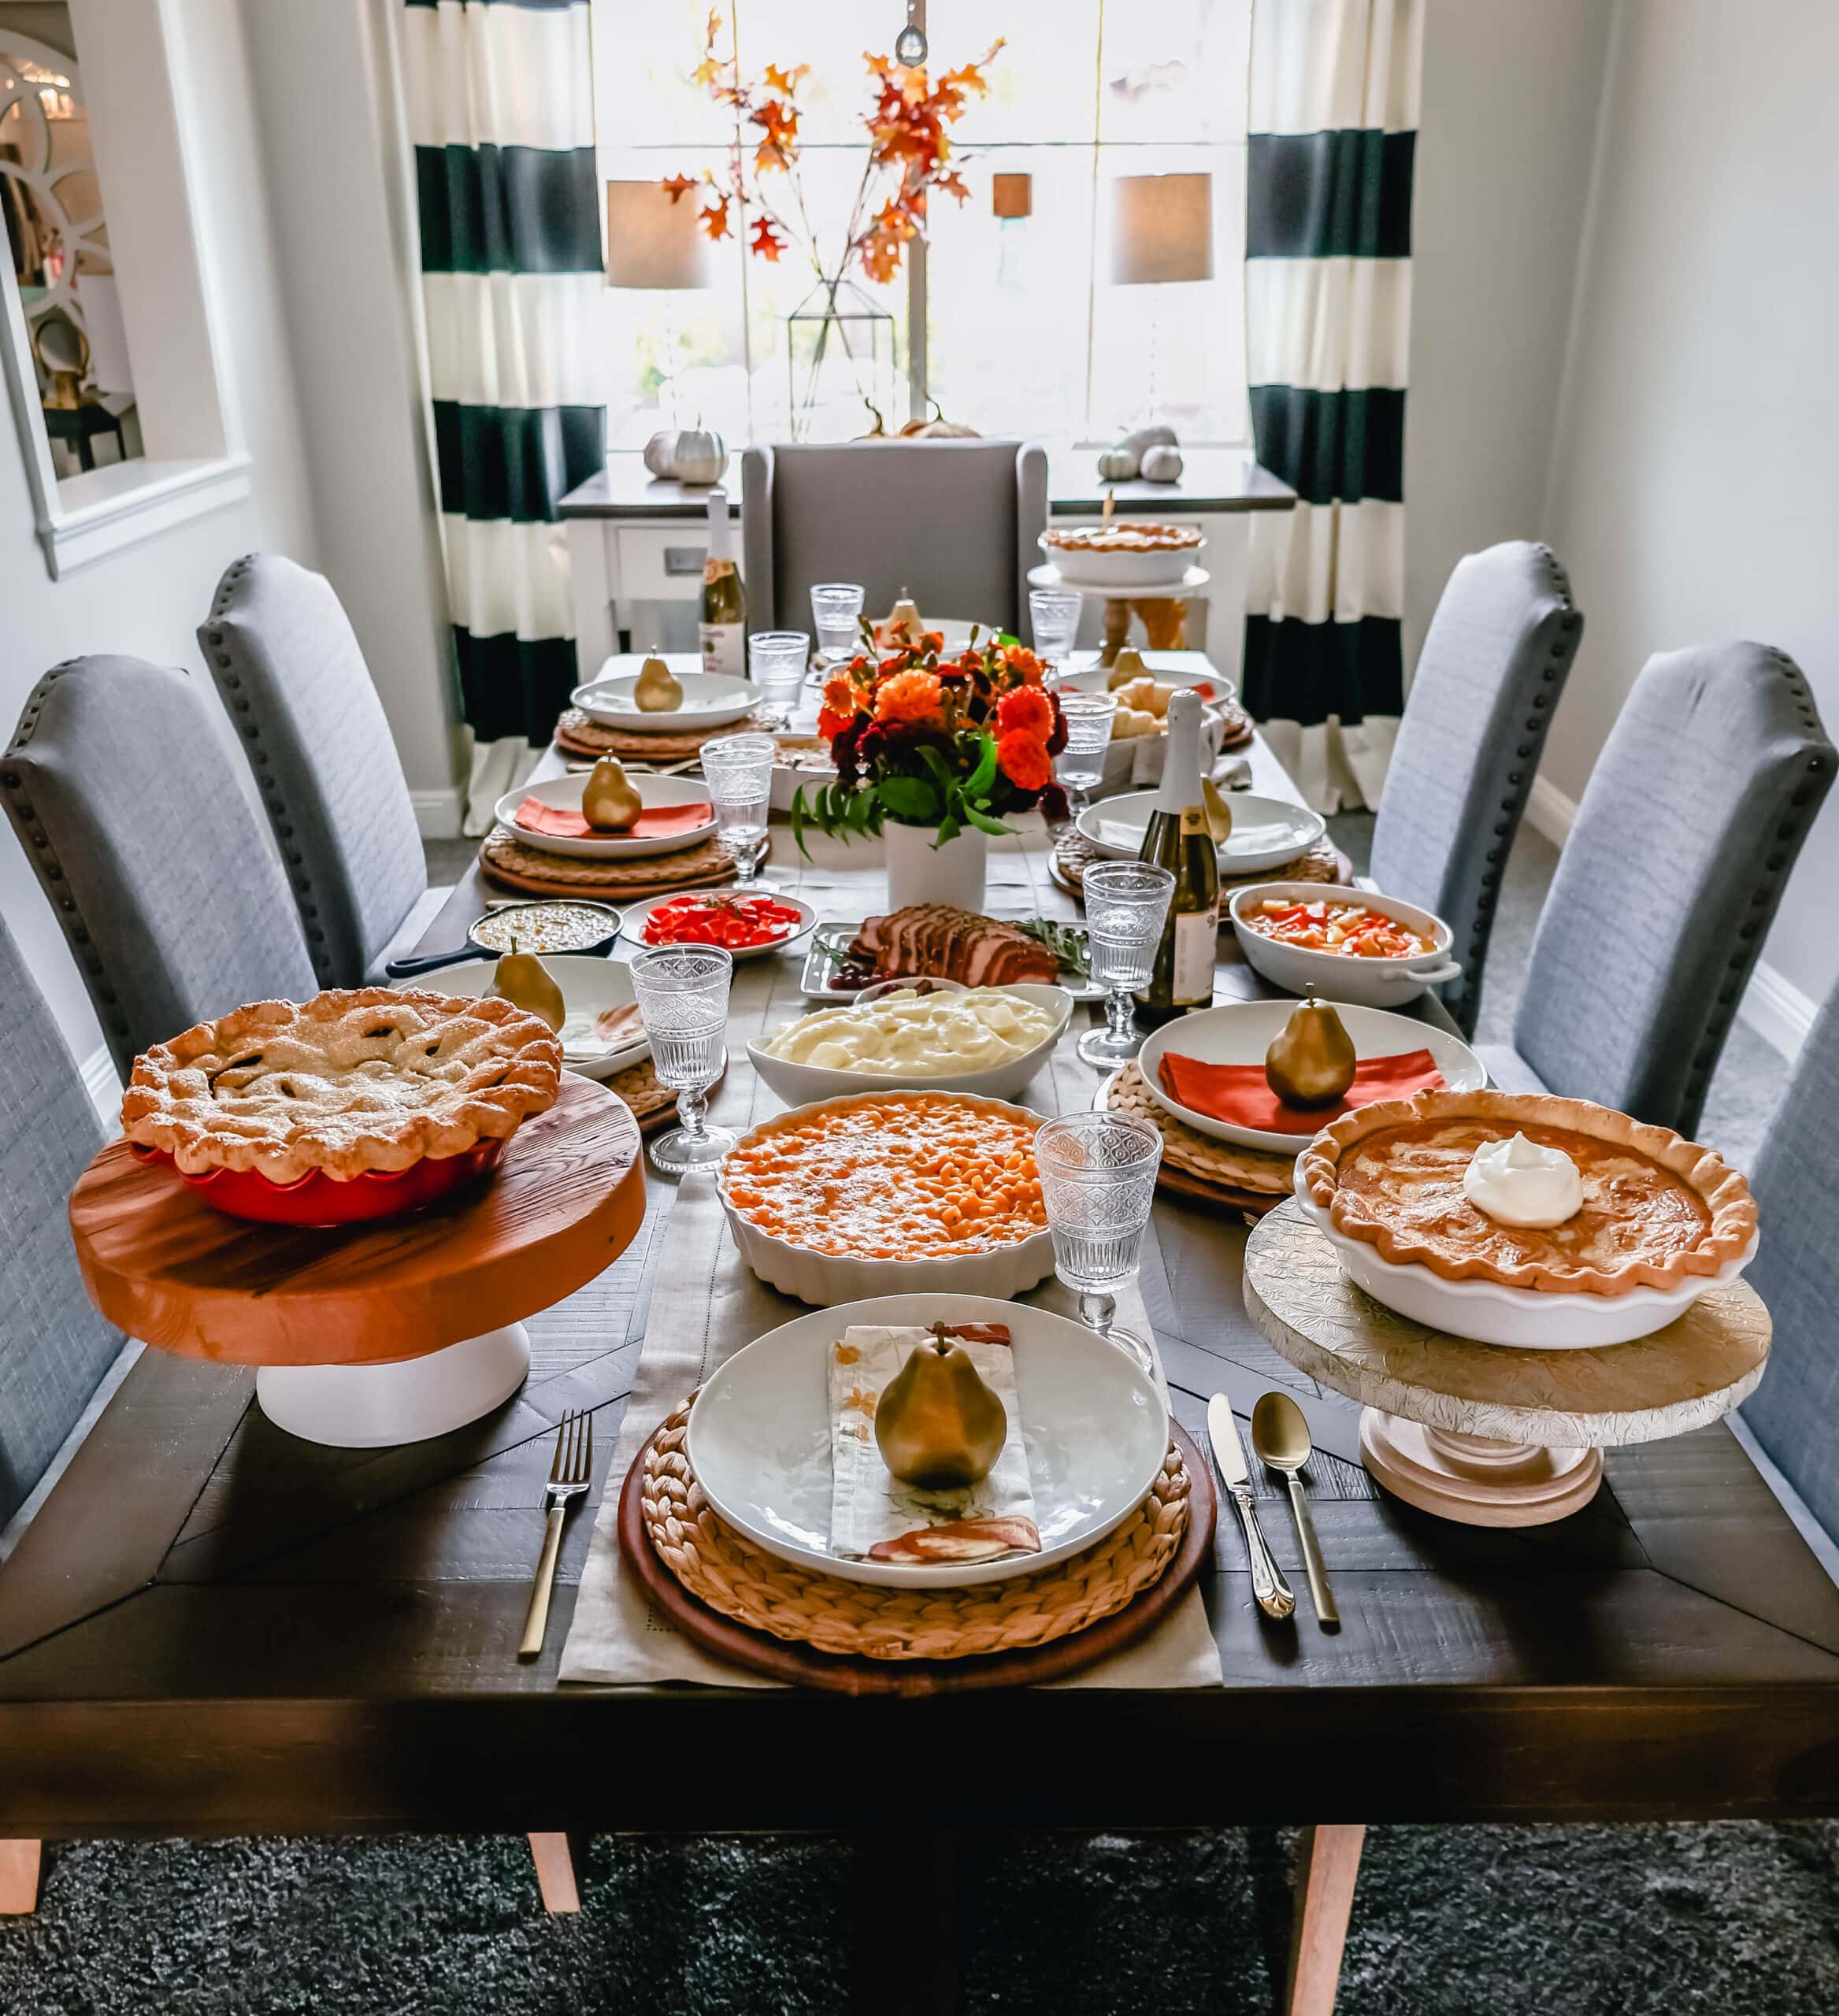 Friendsgiving: How to Throw a Successful Dinner Party